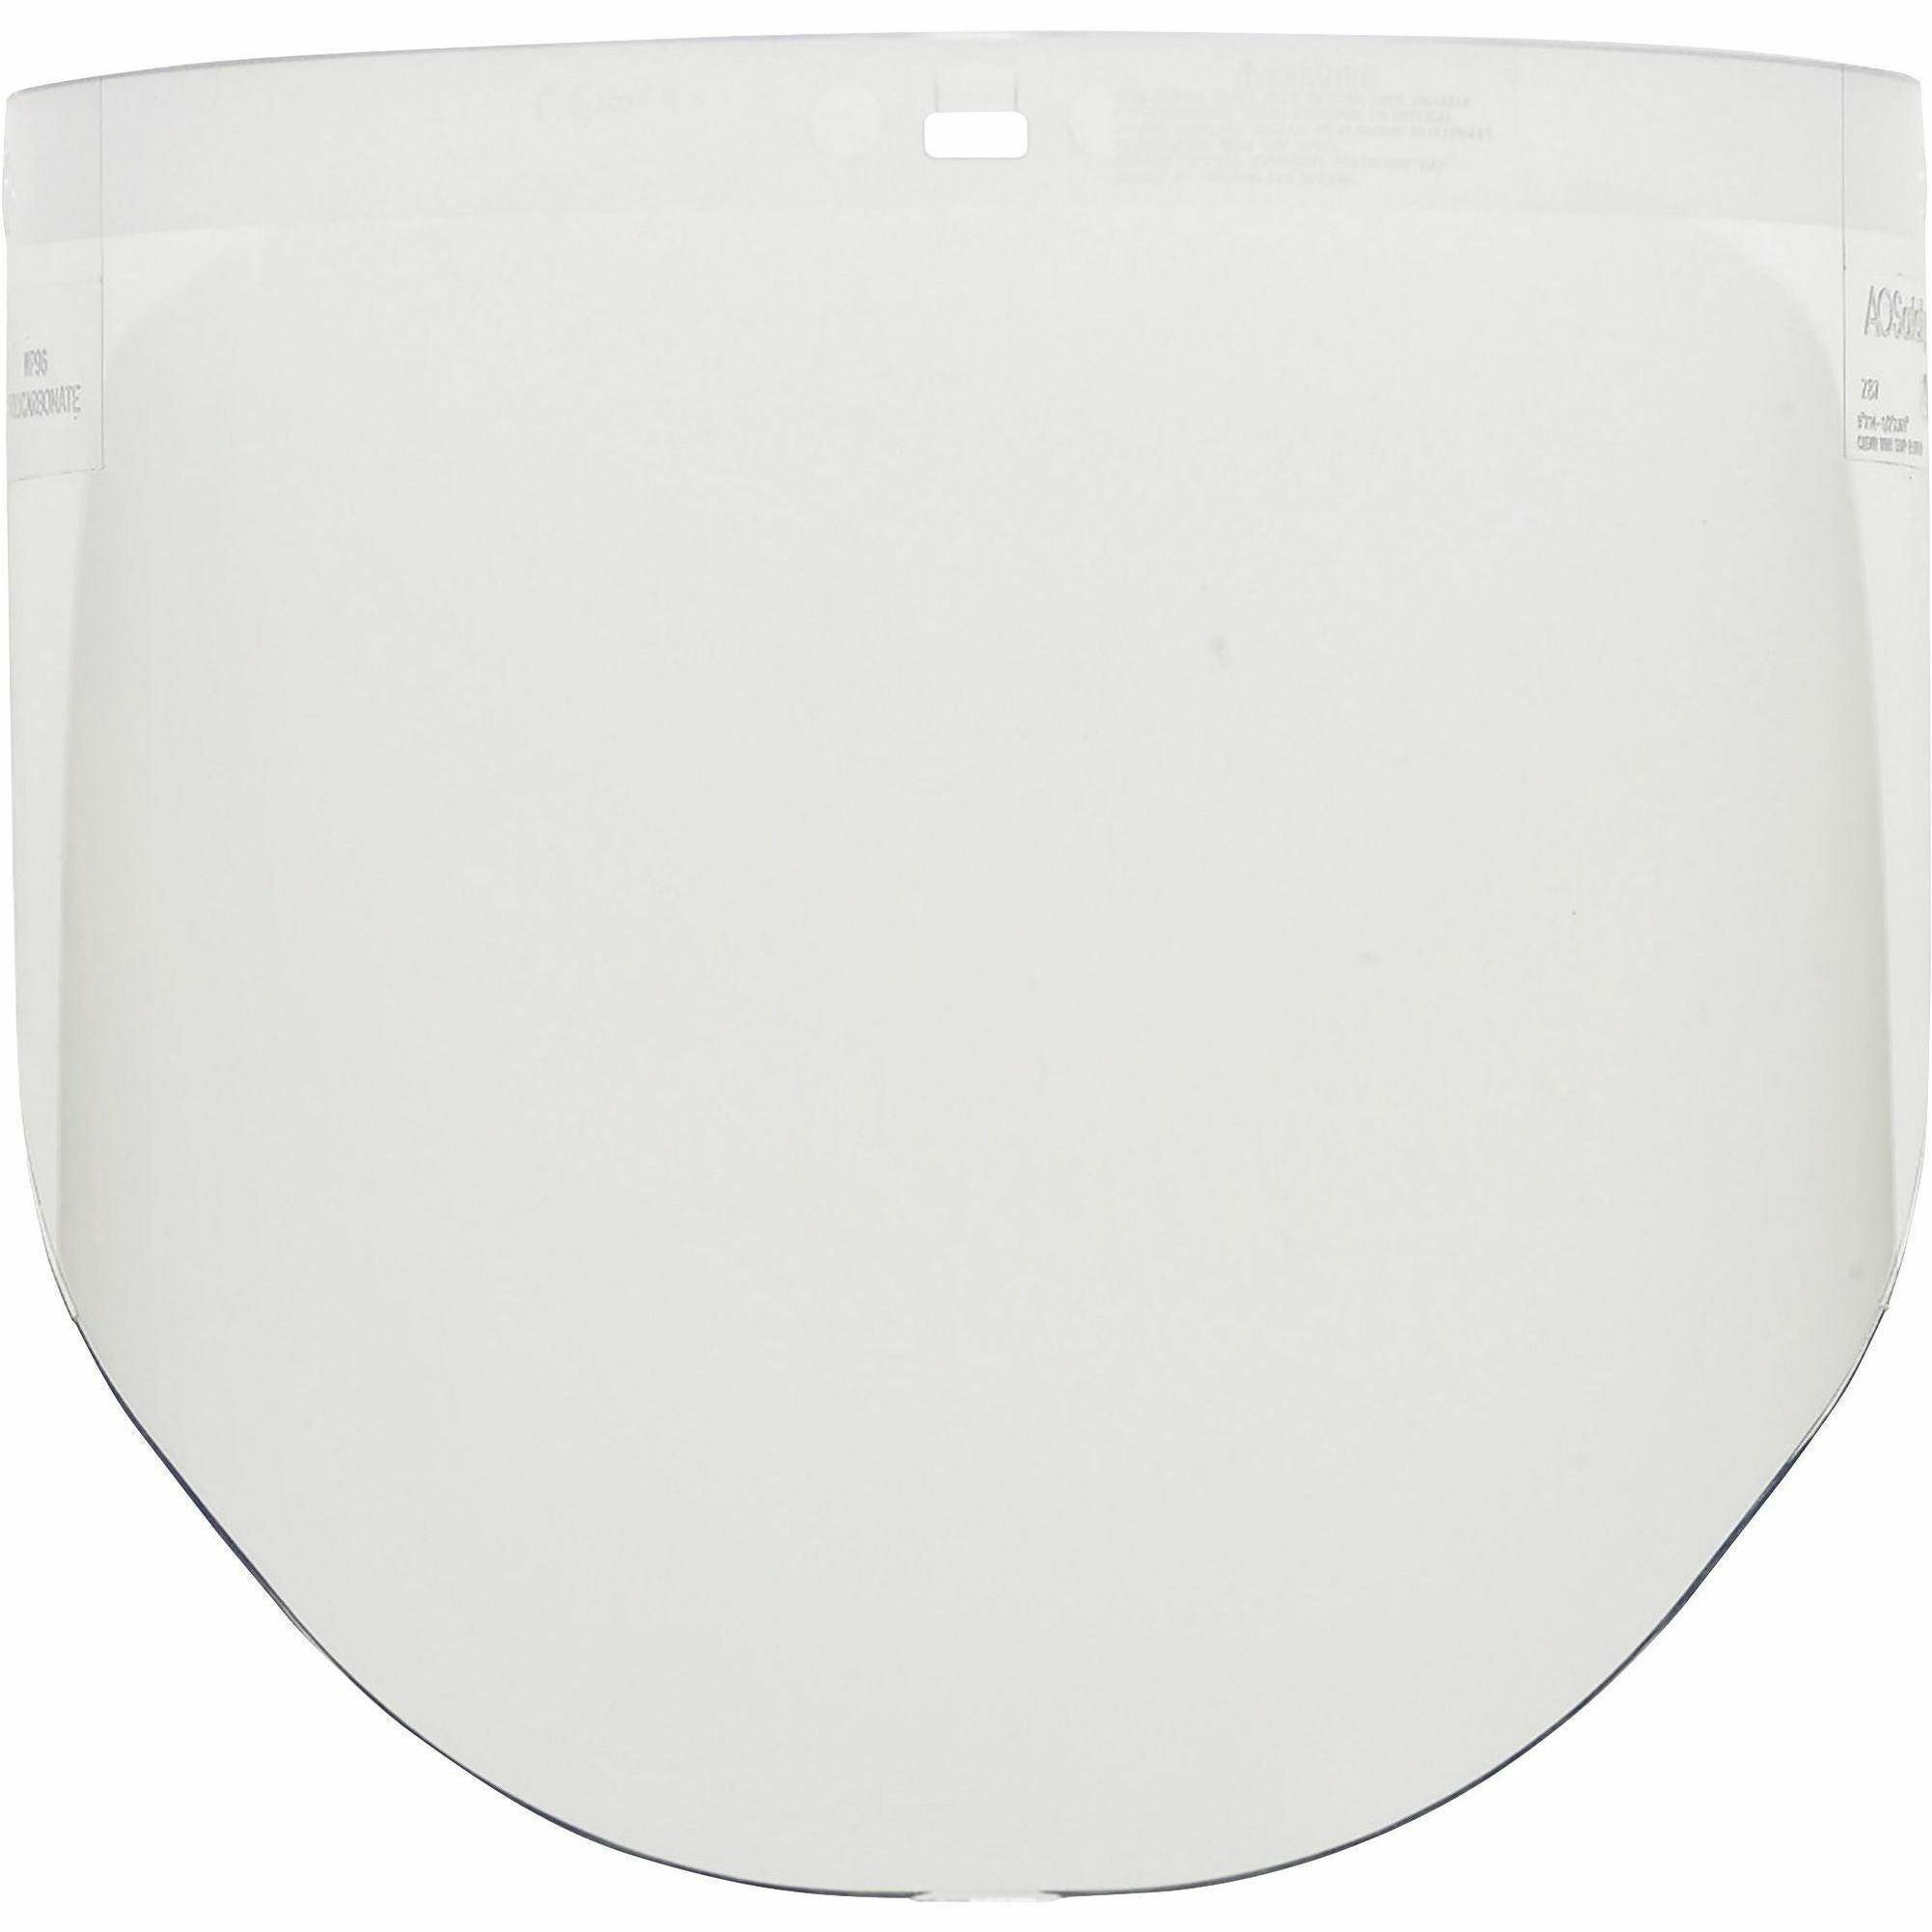 3m-w-series-face-shield-for-x5000-series-helmet_mmmwp96ct - 2